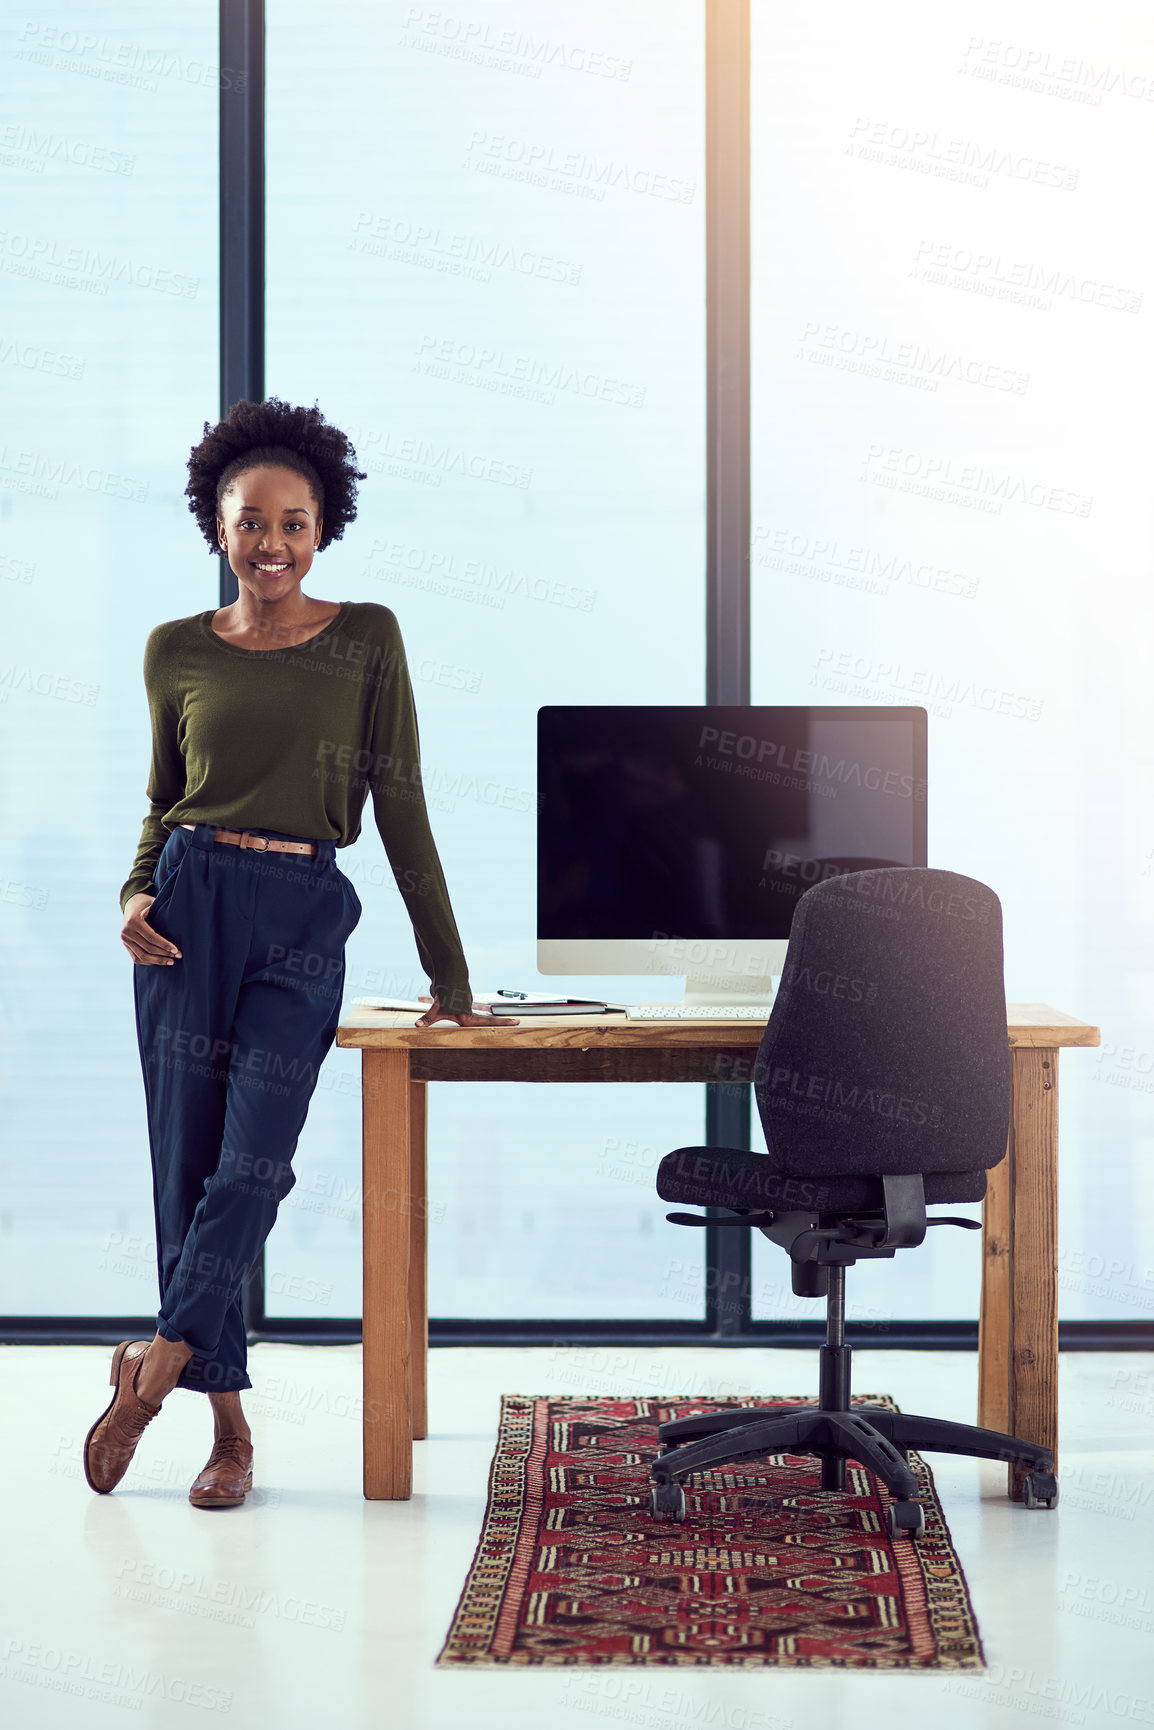 Buy stock photo Portrait of a young designer leaning on her work station desk in front of a window